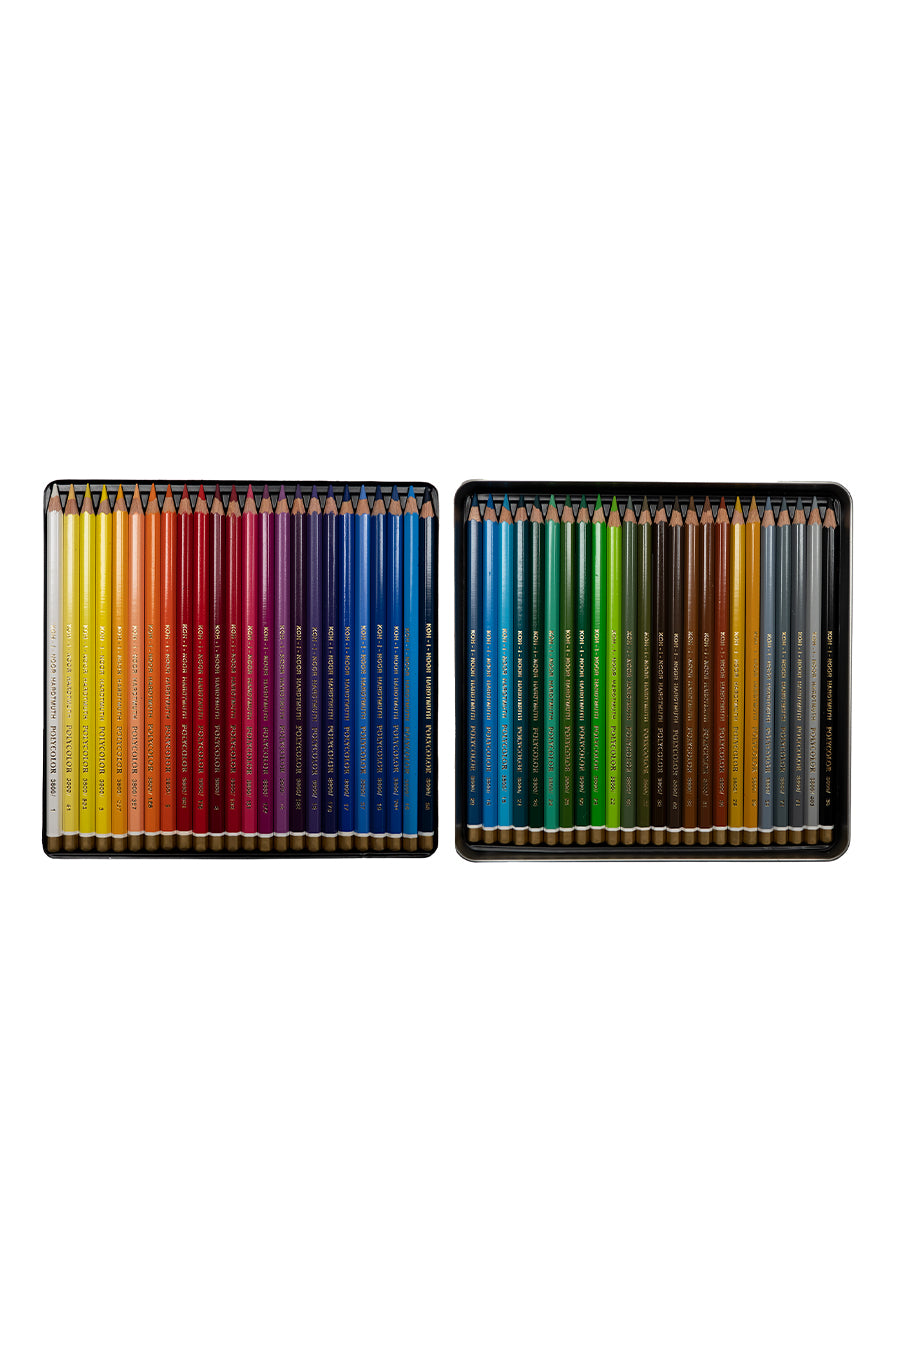 Koh-I-Noor Colored Pencil Drawing Bundle, Includes Polycolor Colored P —  CHIMIYA